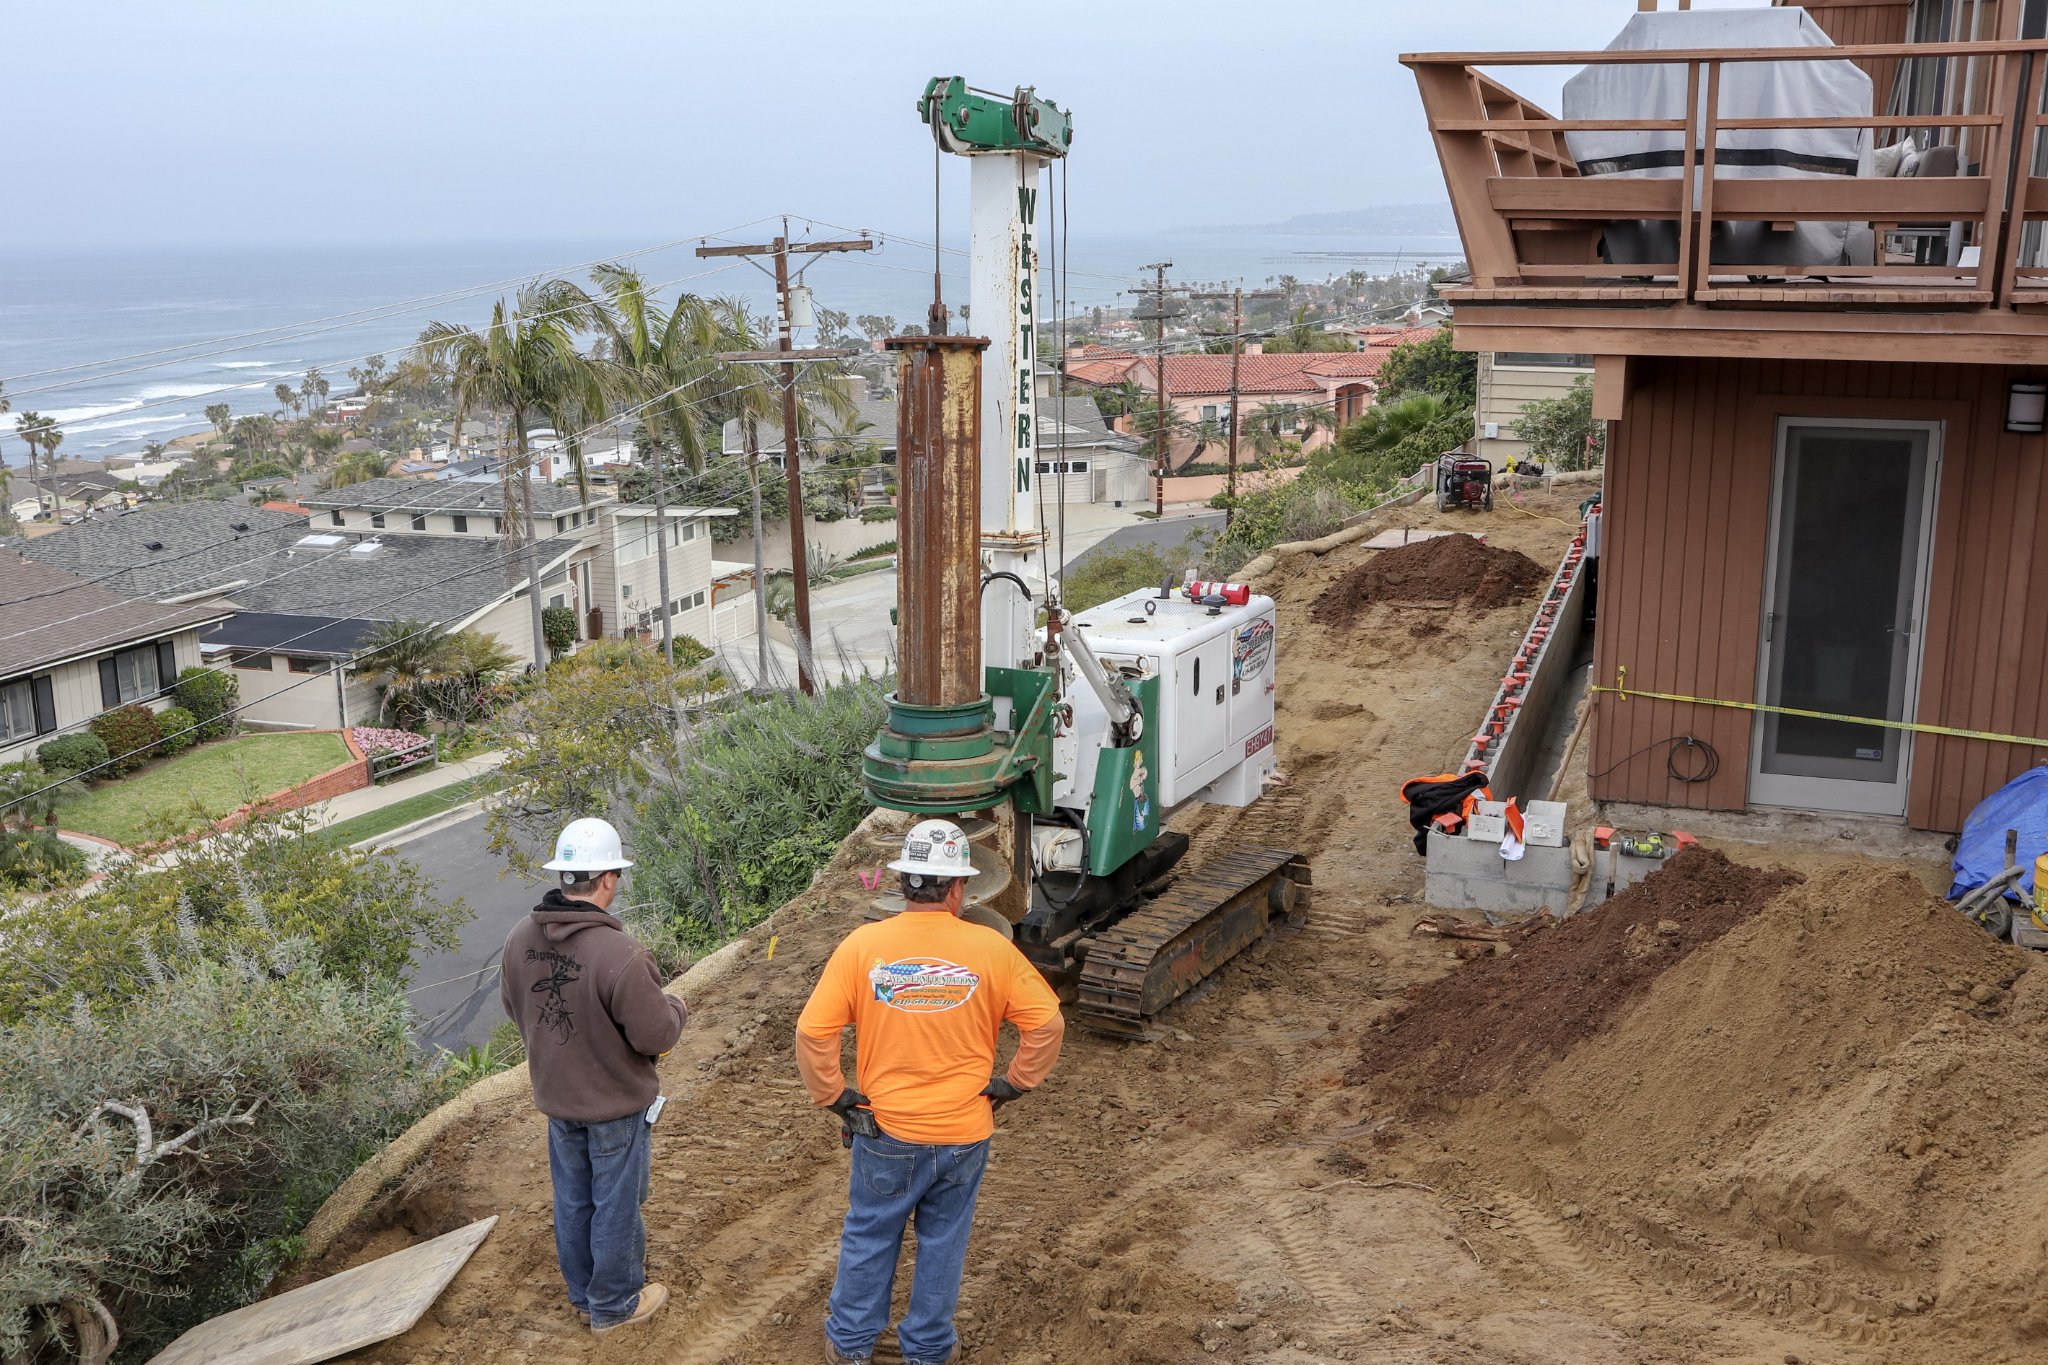 Two men in hardhats observe a small access drill on a hill overlooking houses and shoreline in La Jolla, CA.